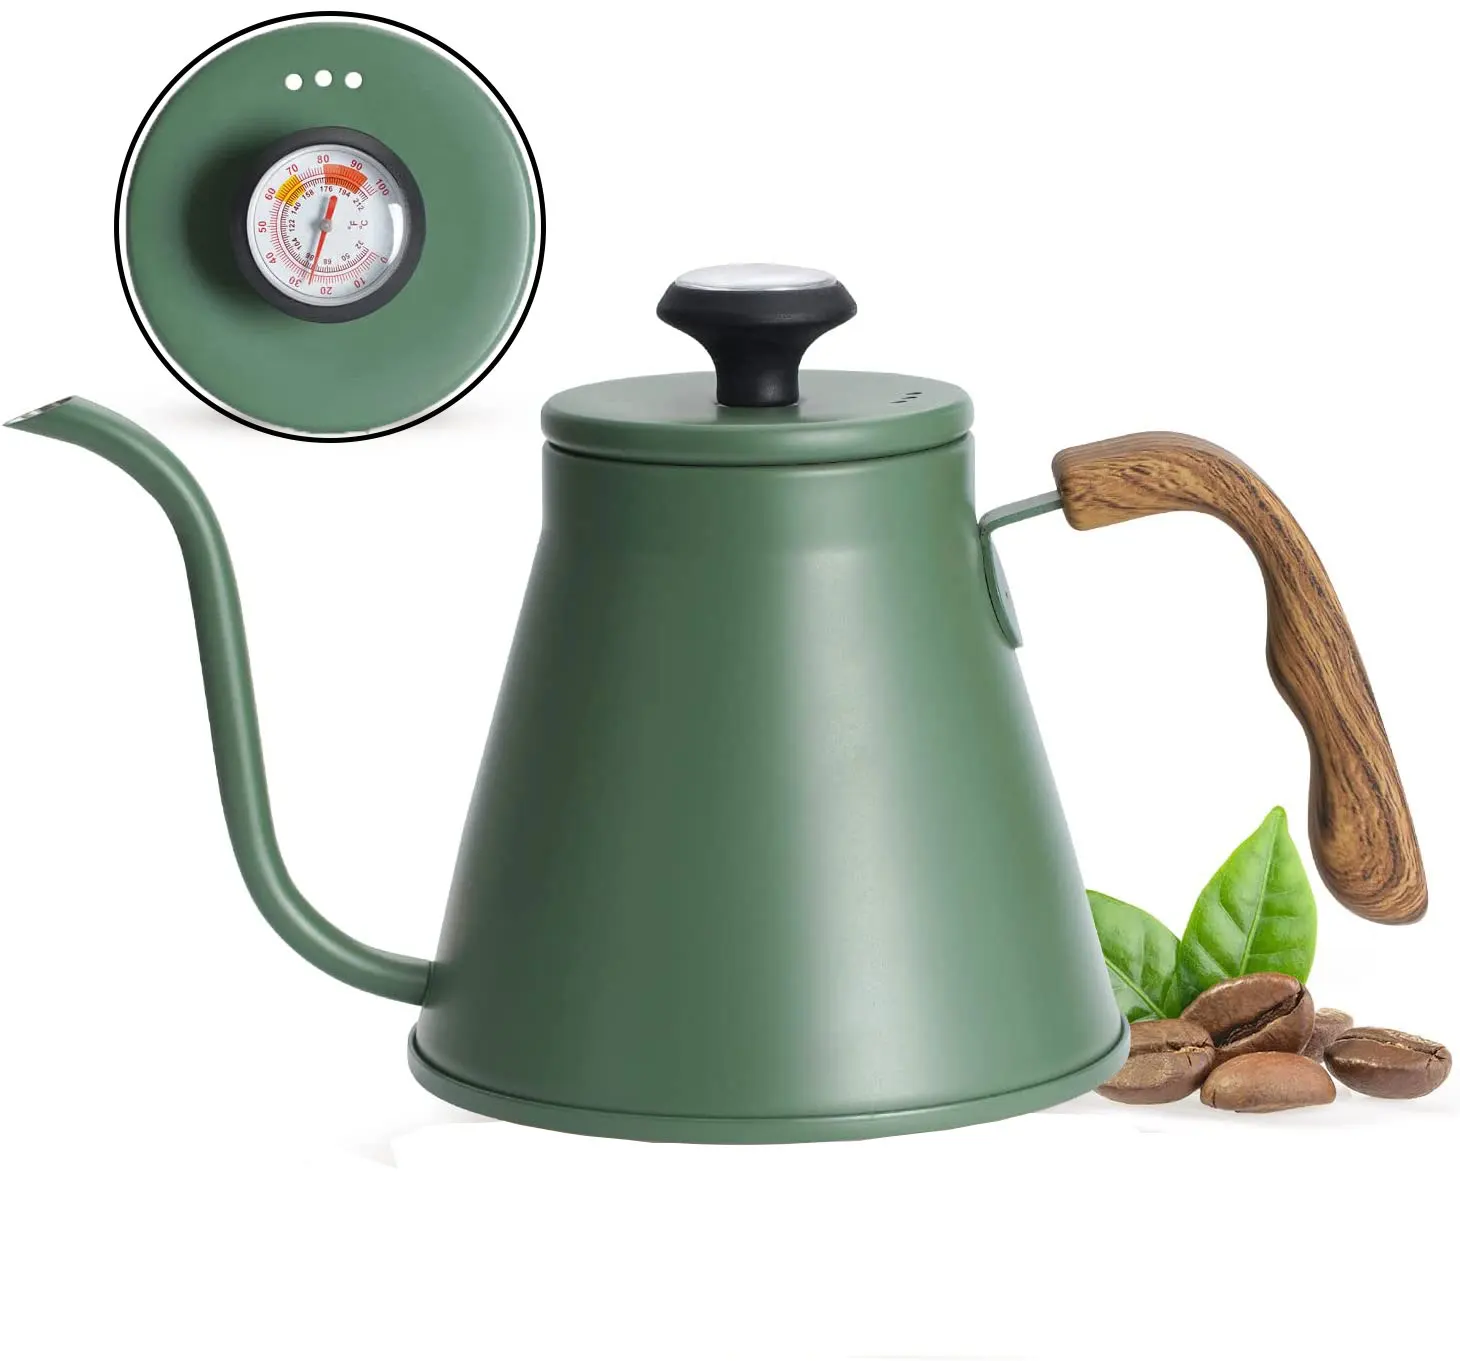 

42oz Pour Over Kettle Stove Top,Gooseneck Kettle, Coffee kettle with Exact Thermometer， Anti-Hot Handle, for Drip Coffee & Tea